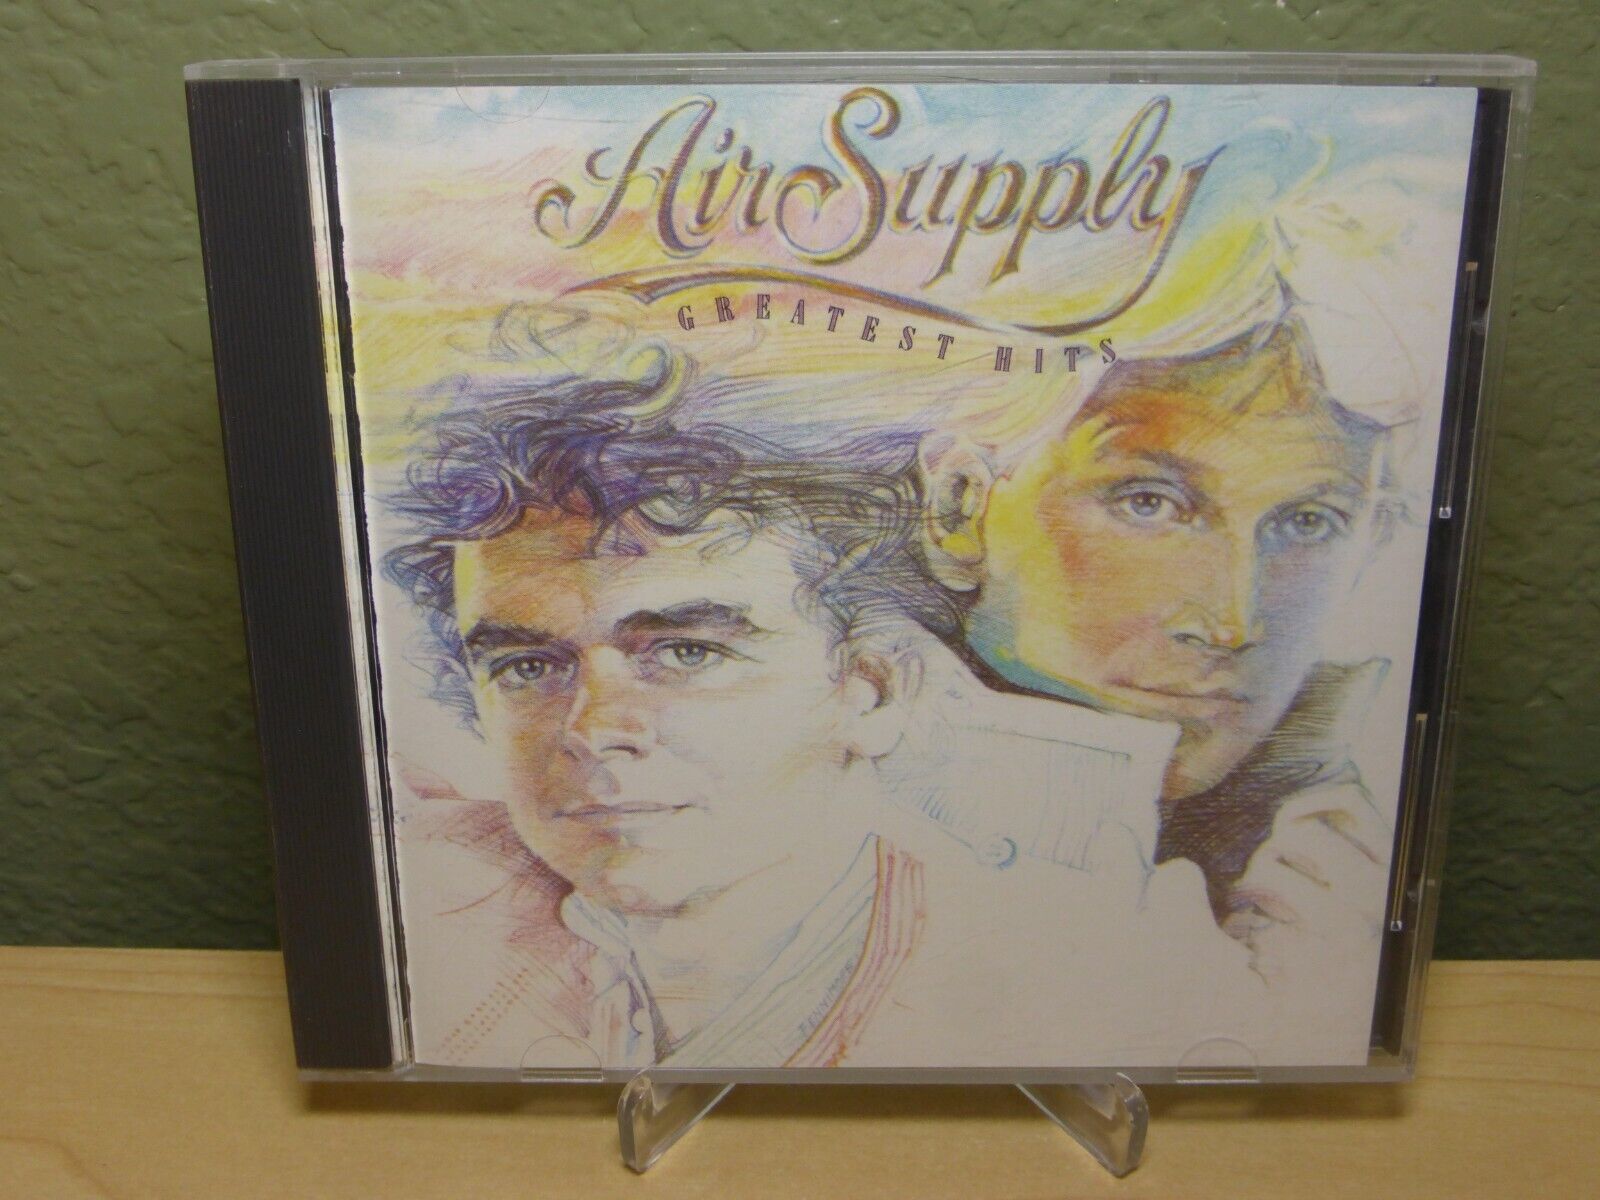 Greatest Hits [Arista] by Air Supply CD Disc Made In Japan Original Smooth Case